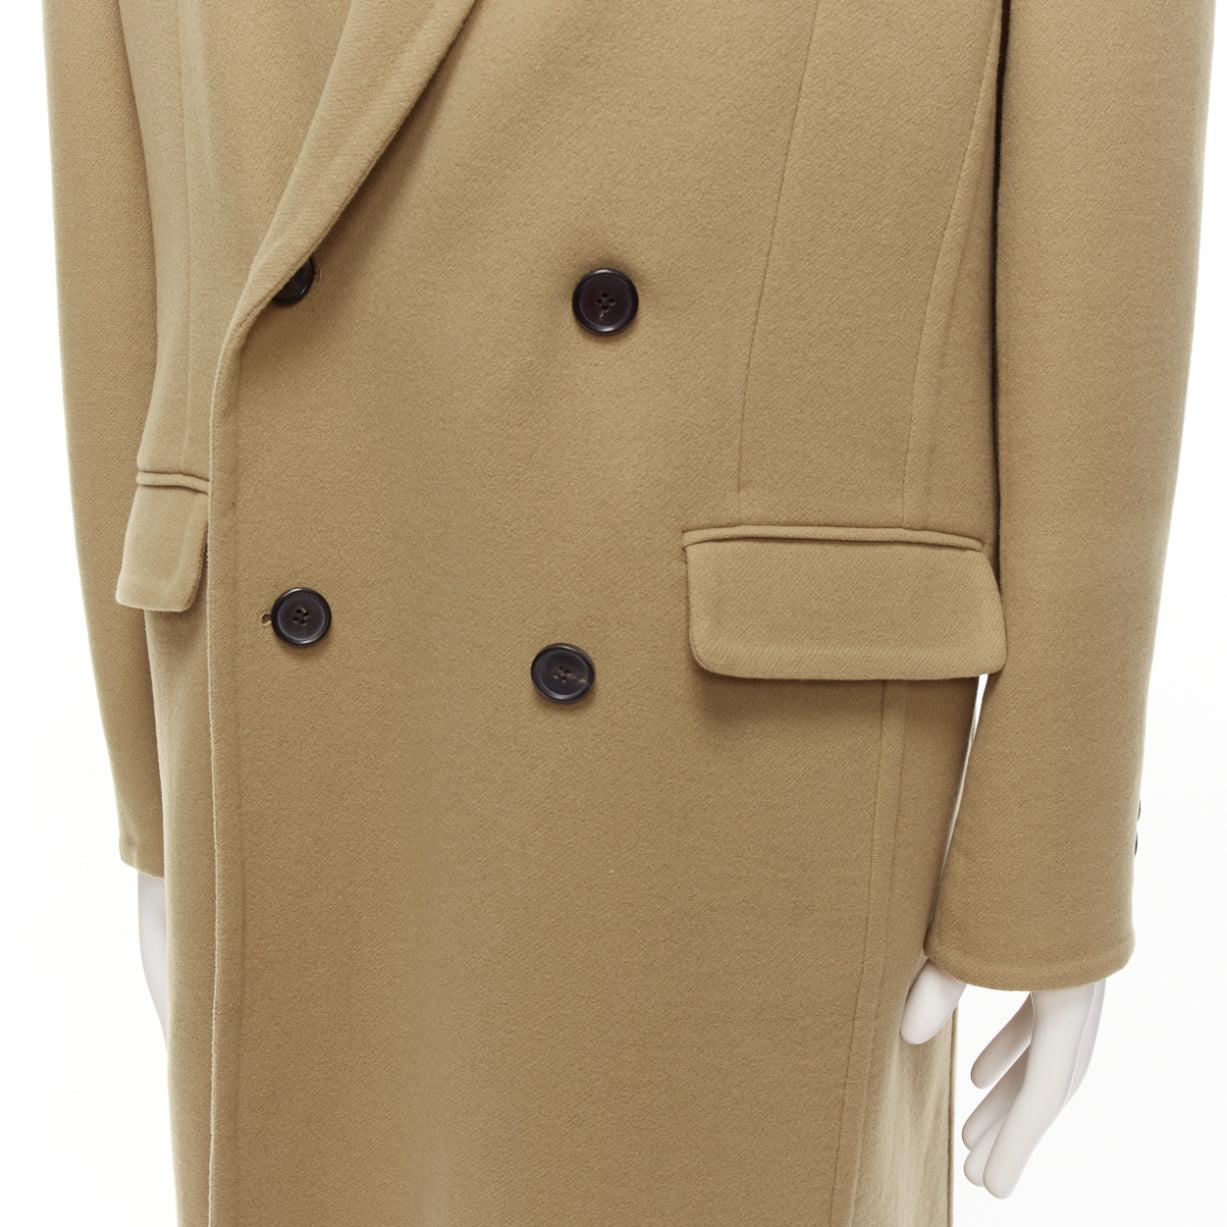 LOEWE camel wool cashmere black double breasted oversized coat IT46 S
Reference: MLCO/A00001
Brand: Loewe
Designer: JW Anderson
Material: Wool, Cashmere
Color: Tan Brown, Black
Pattern: Solid
Closure: Button
Lining: Beige Fabric
Extra Details: